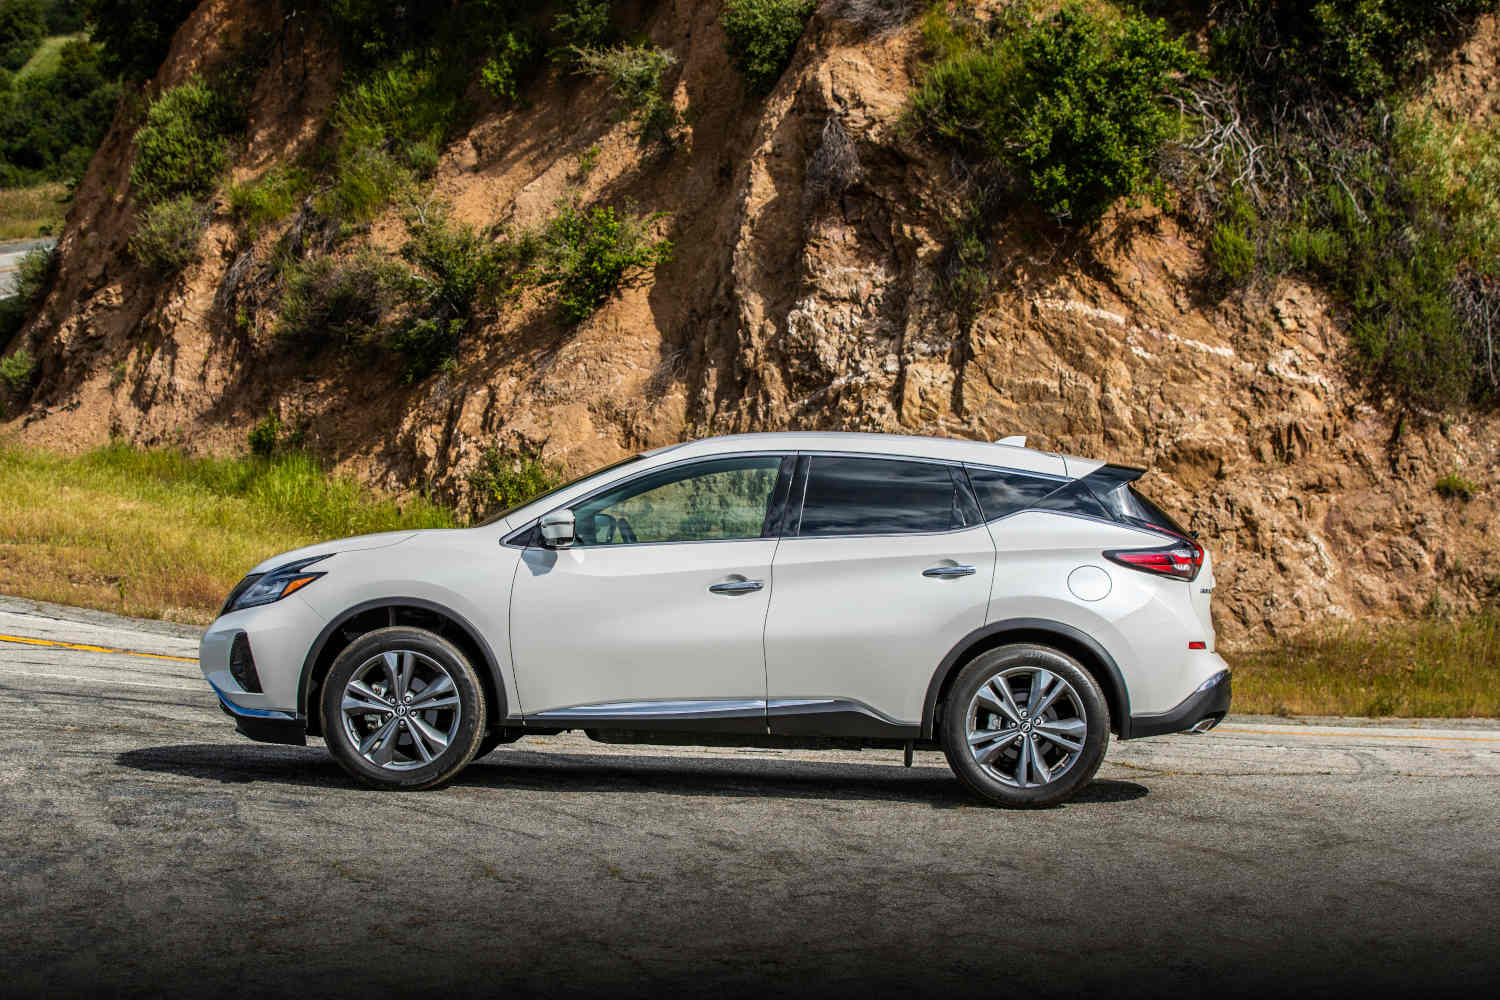 The 2023 Nissan Murano reliability is high